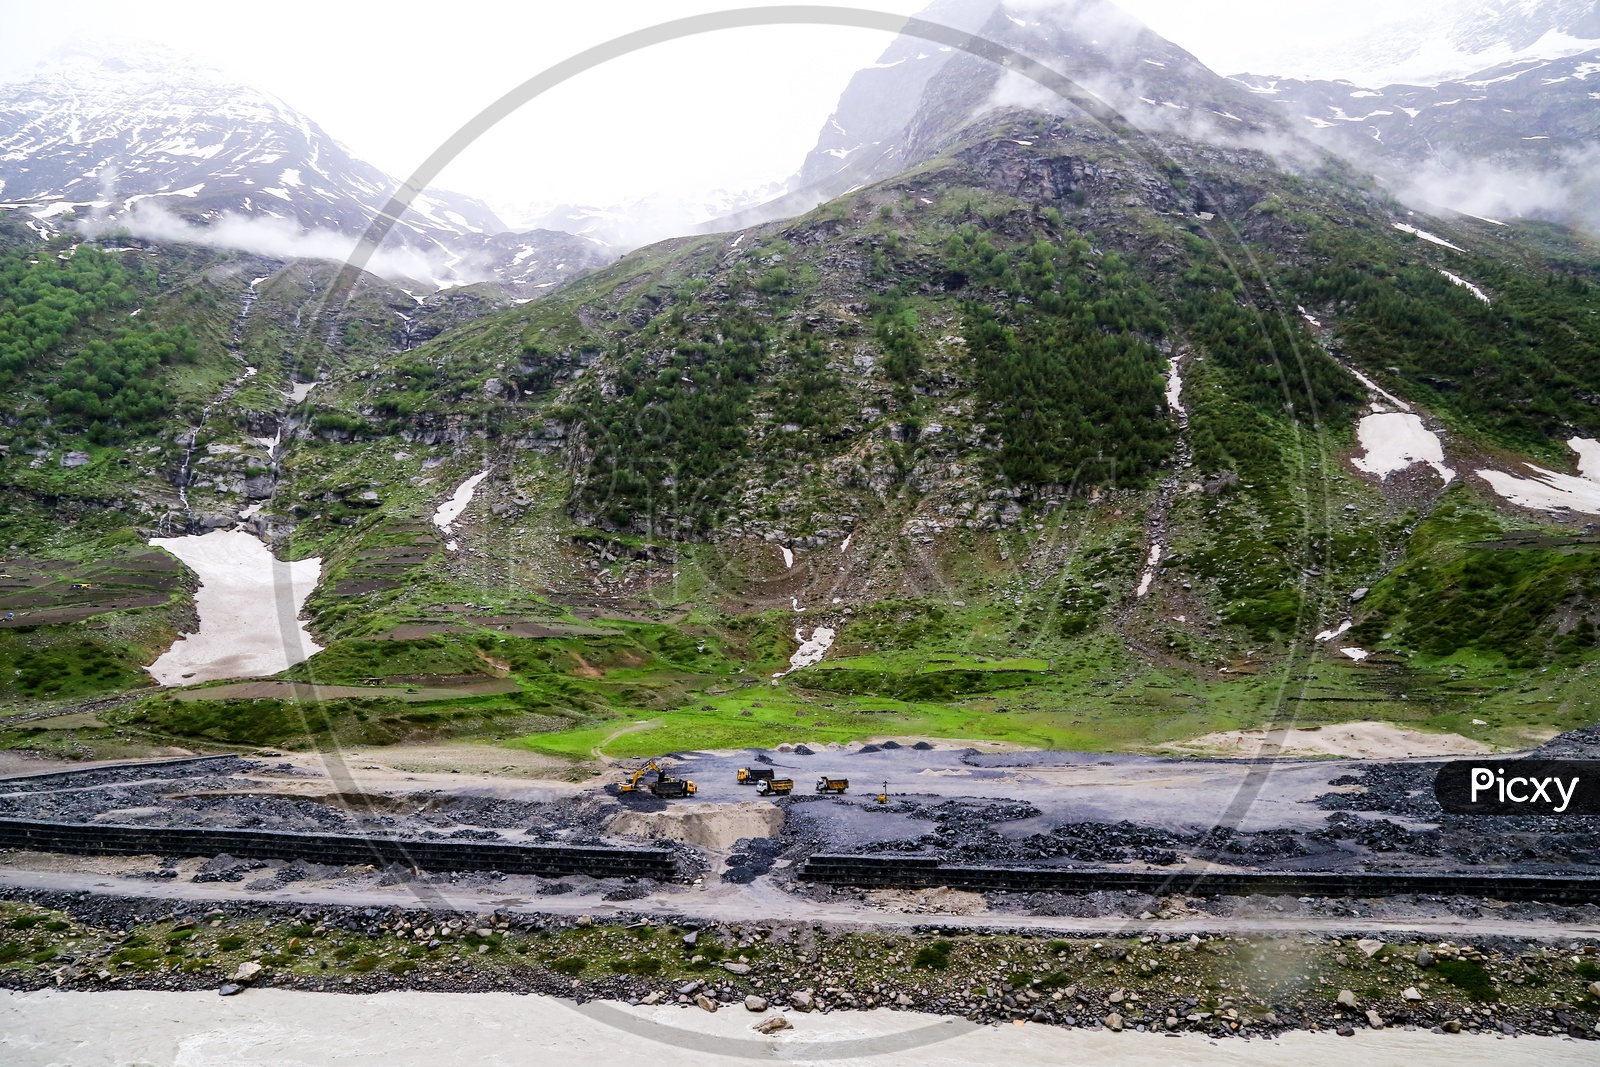 Construction works On the way to Rohtang Pass